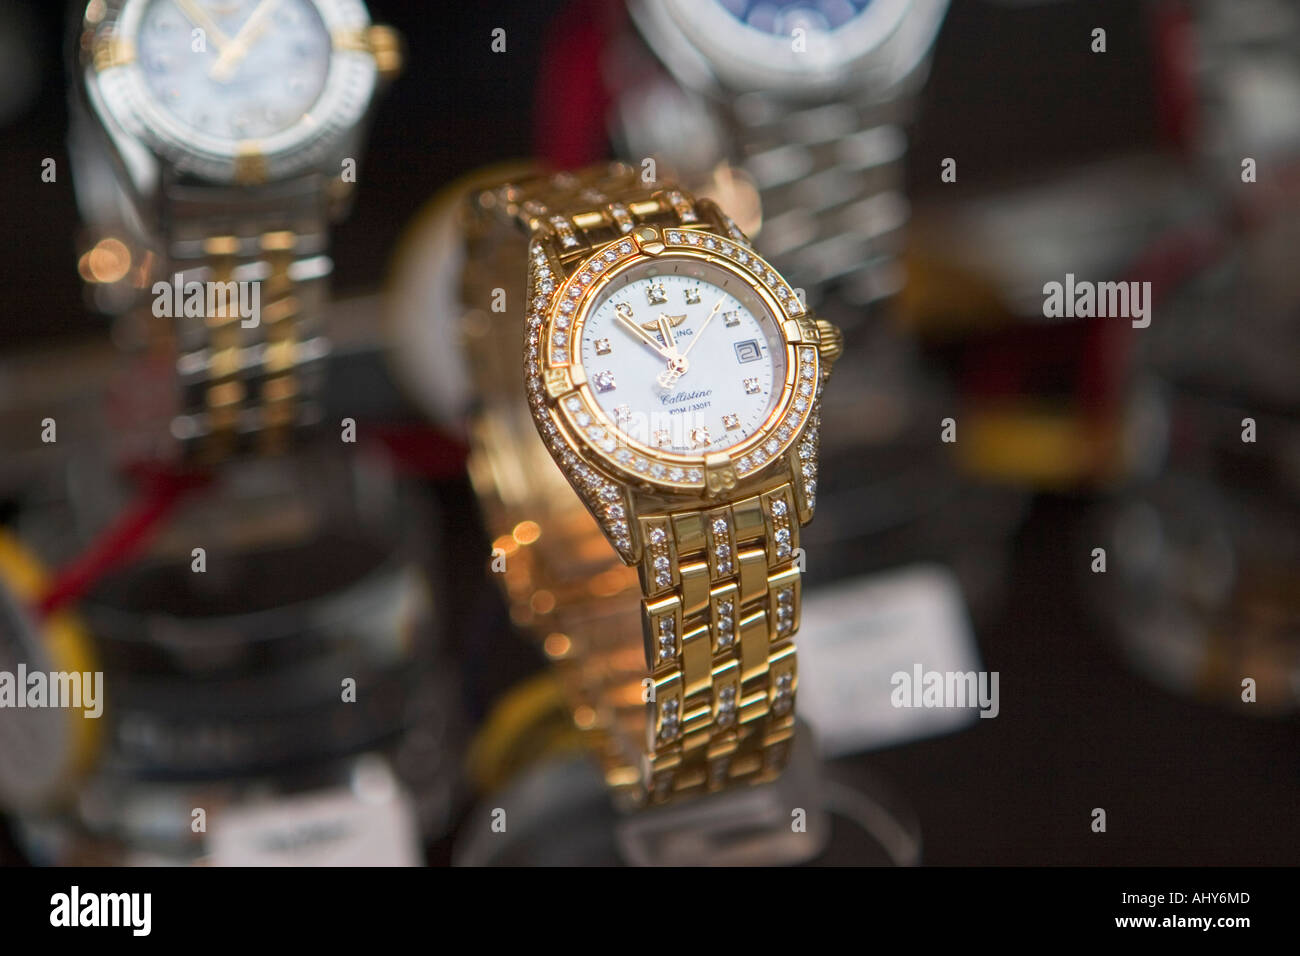 Close up of Breitling watch in Watches of Switzerland store window on Oxford Street London Stock Photo